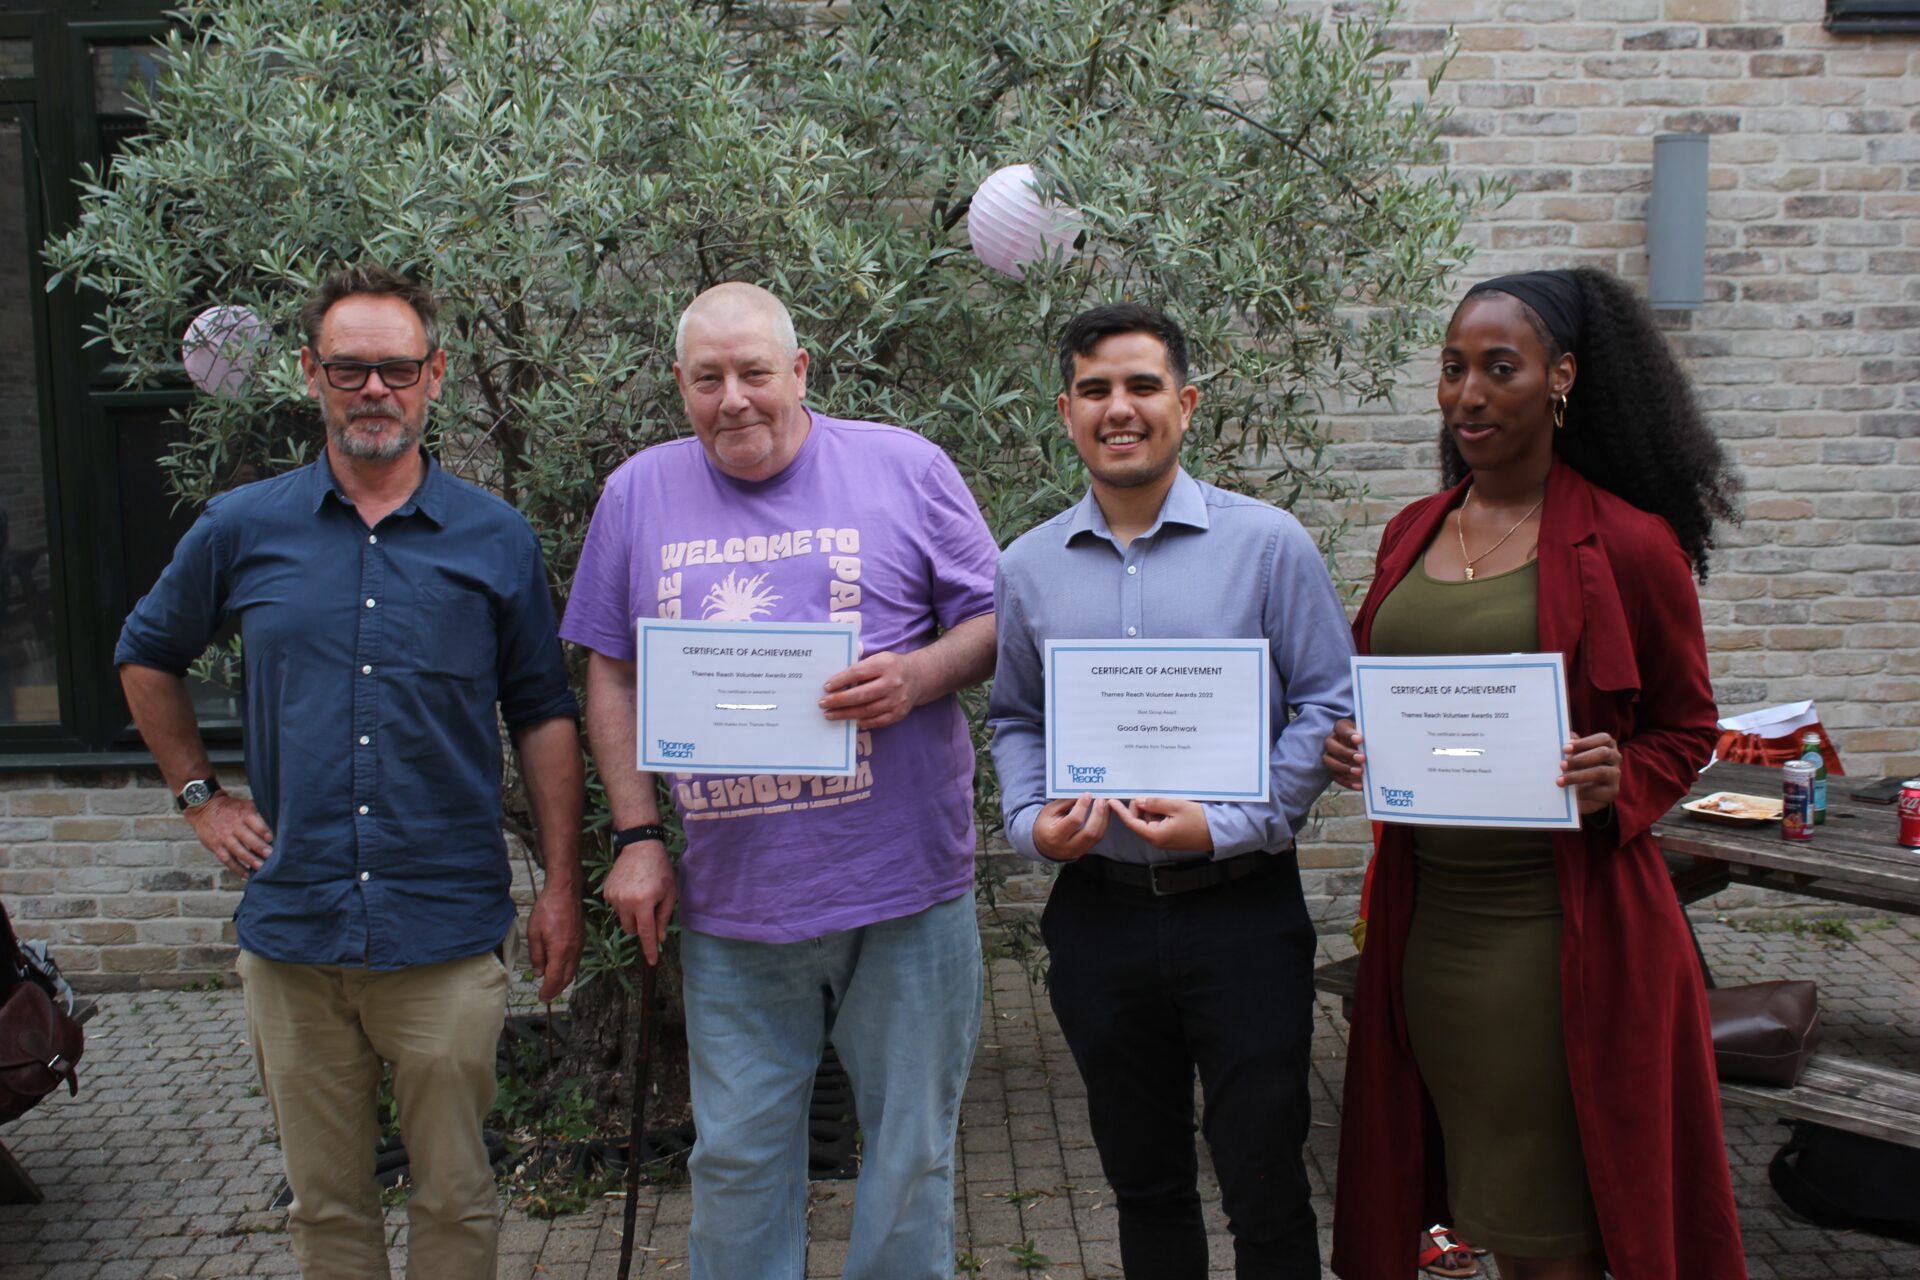 Star volunteers presented with awards at Thames Reach summer event